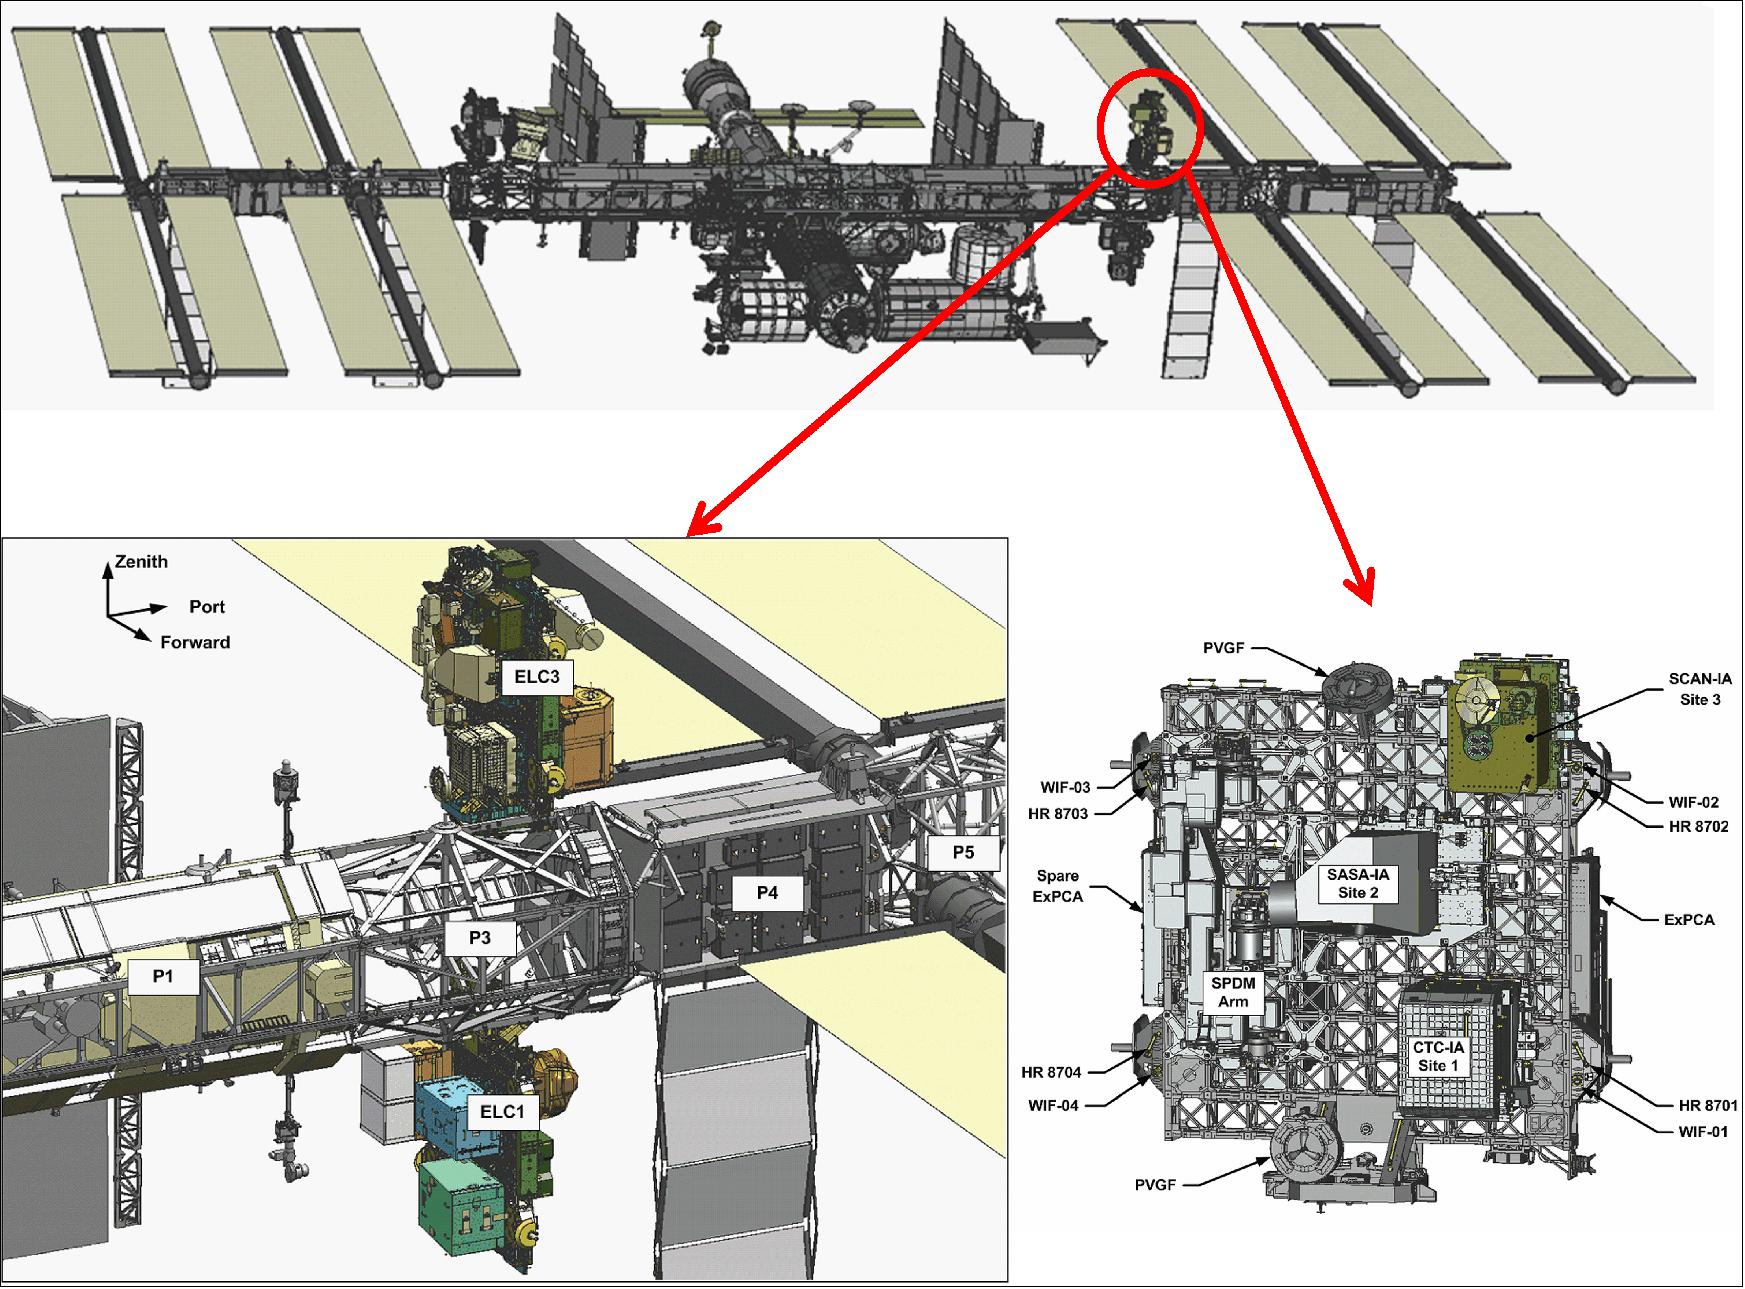 Figure 4: Illustration of the SCaN Testbed location on the ISS (image credit: NASA)